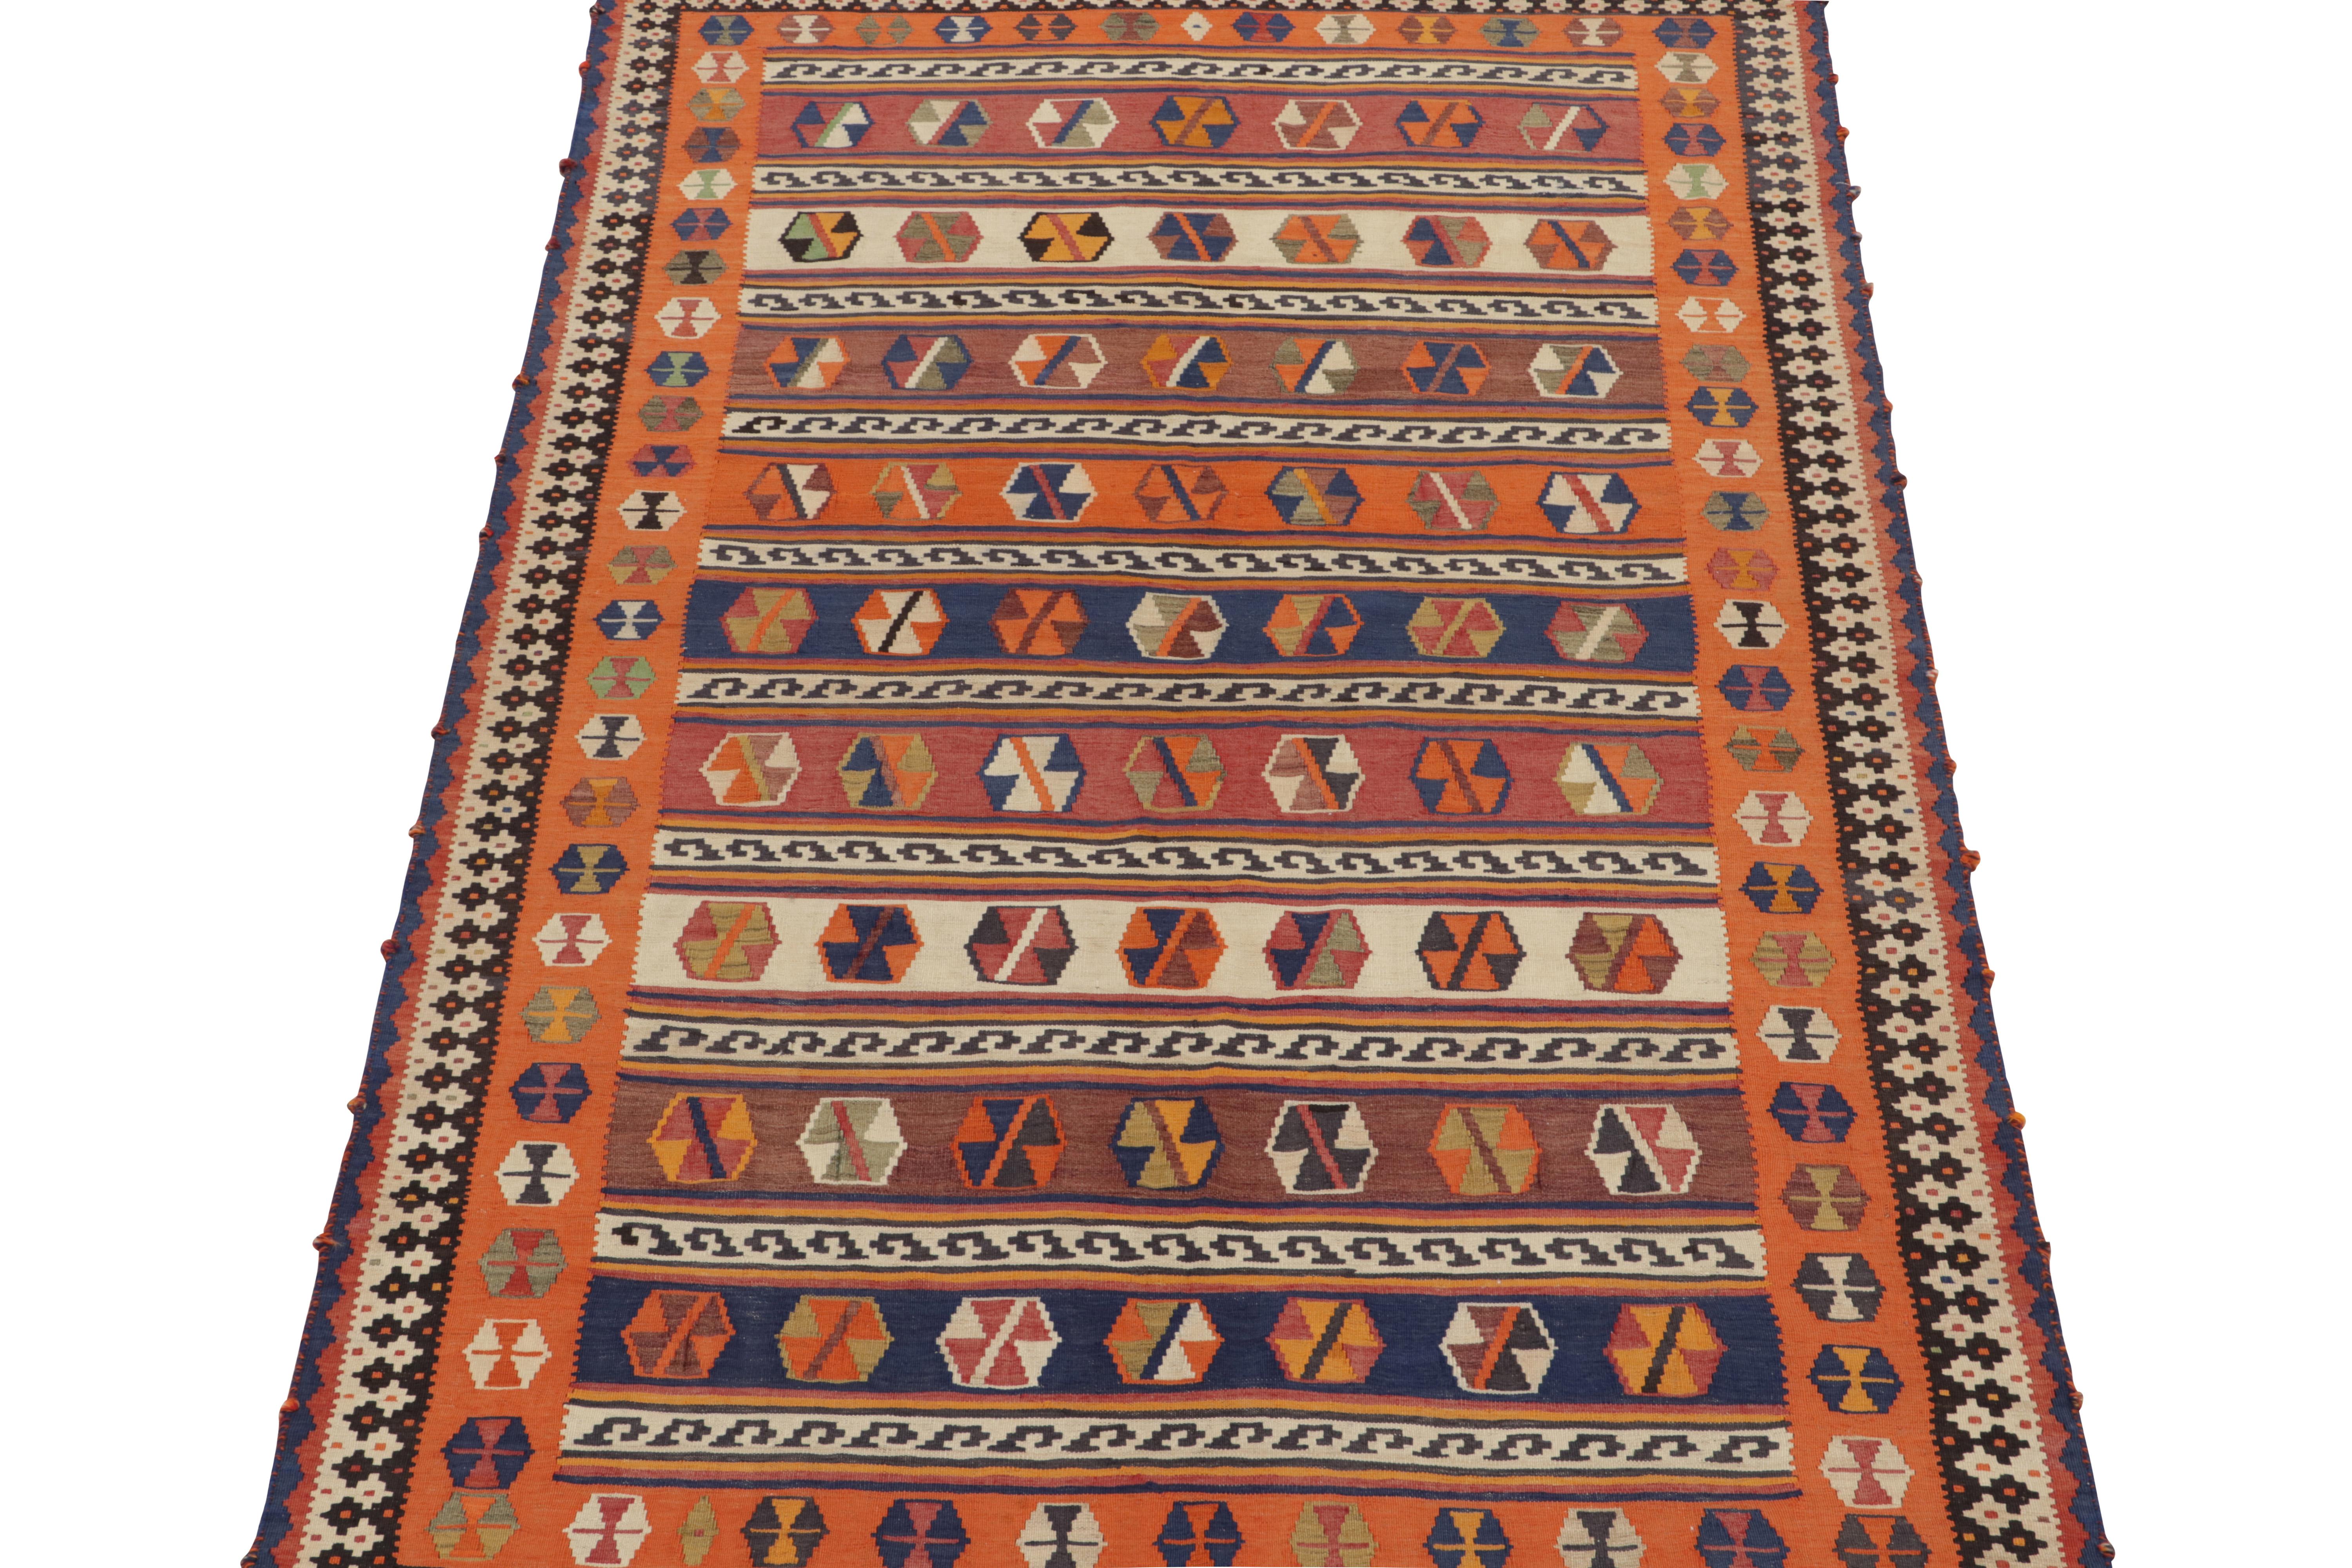 This vintage 5x10 Persian Kilim is a midcentury flat weave believed to originate from the Qashqai Tribe. 

Handwoven in wool circa 1950-1960, its design favors vibrant orange and blue in the wide range of warm colors it hosts. Keen eyes will